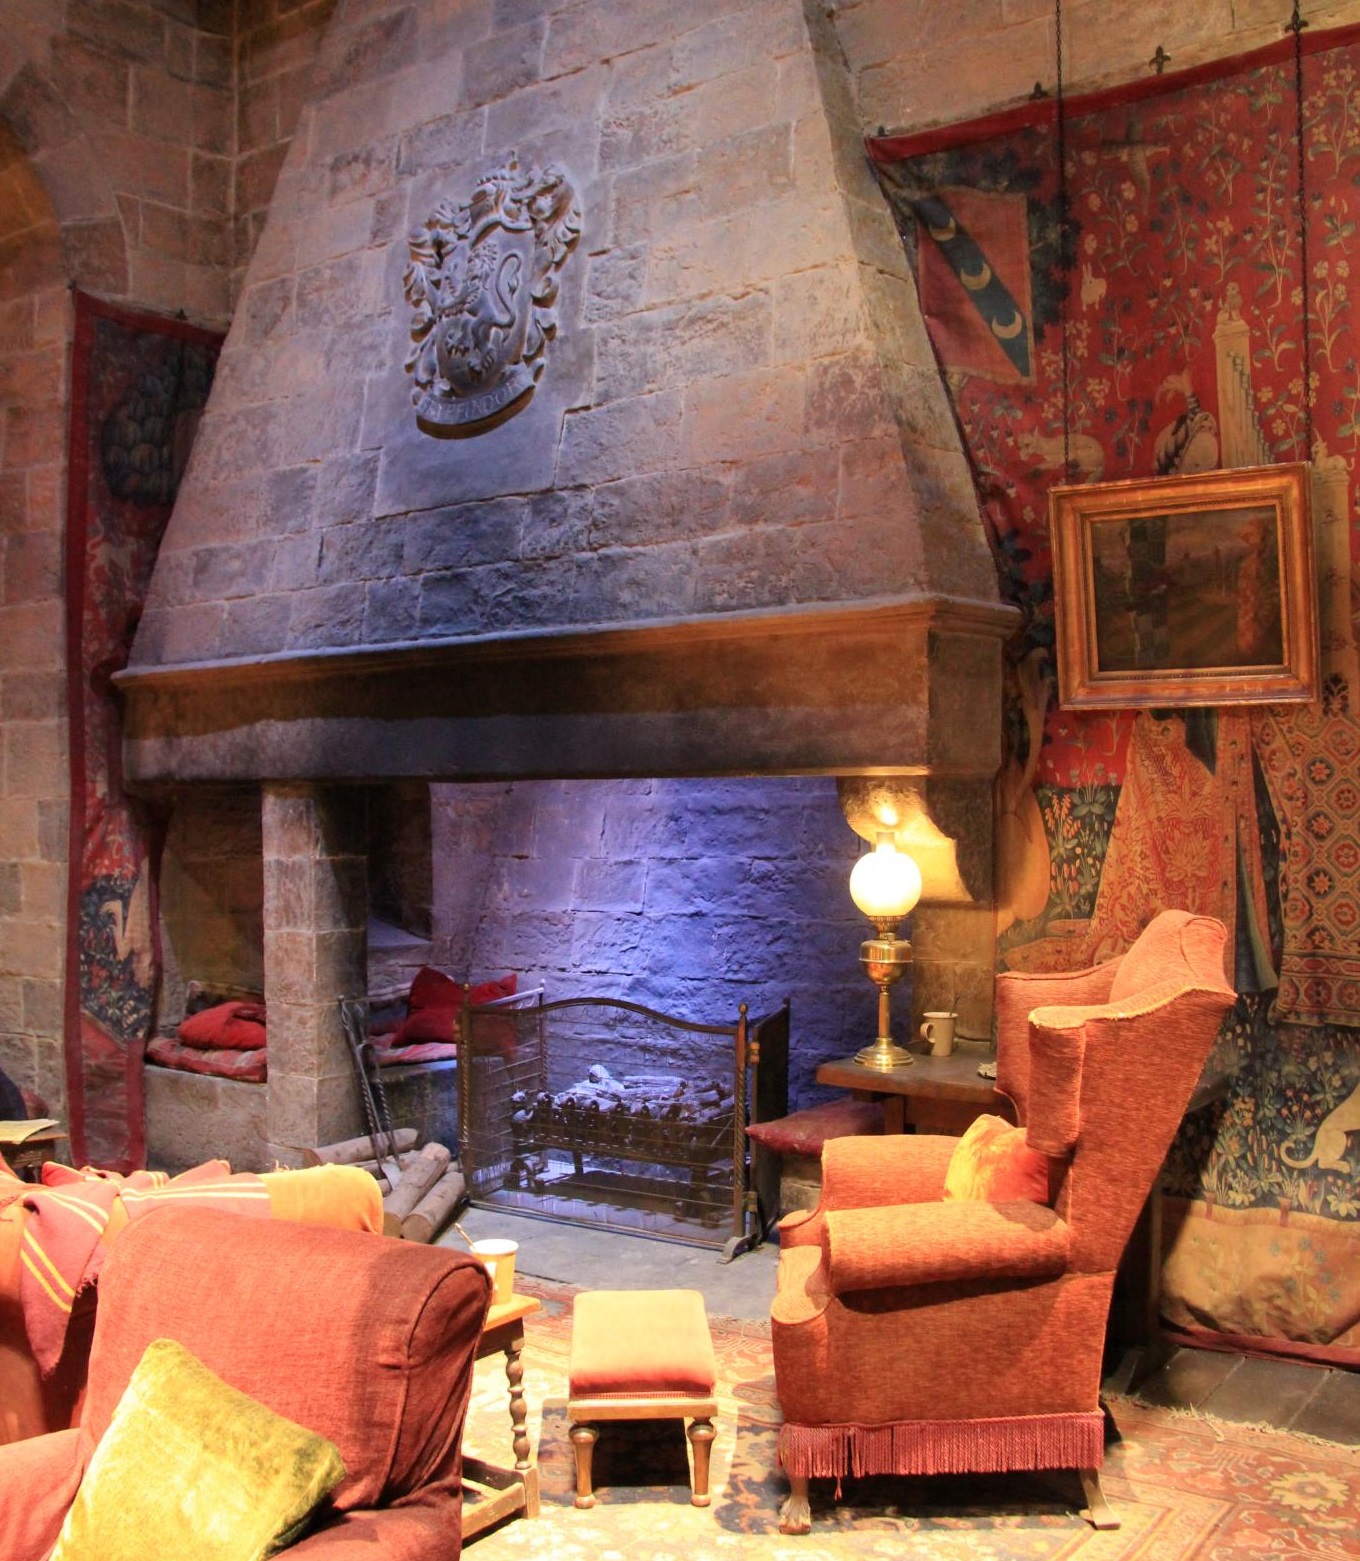 The Harry Potter Room